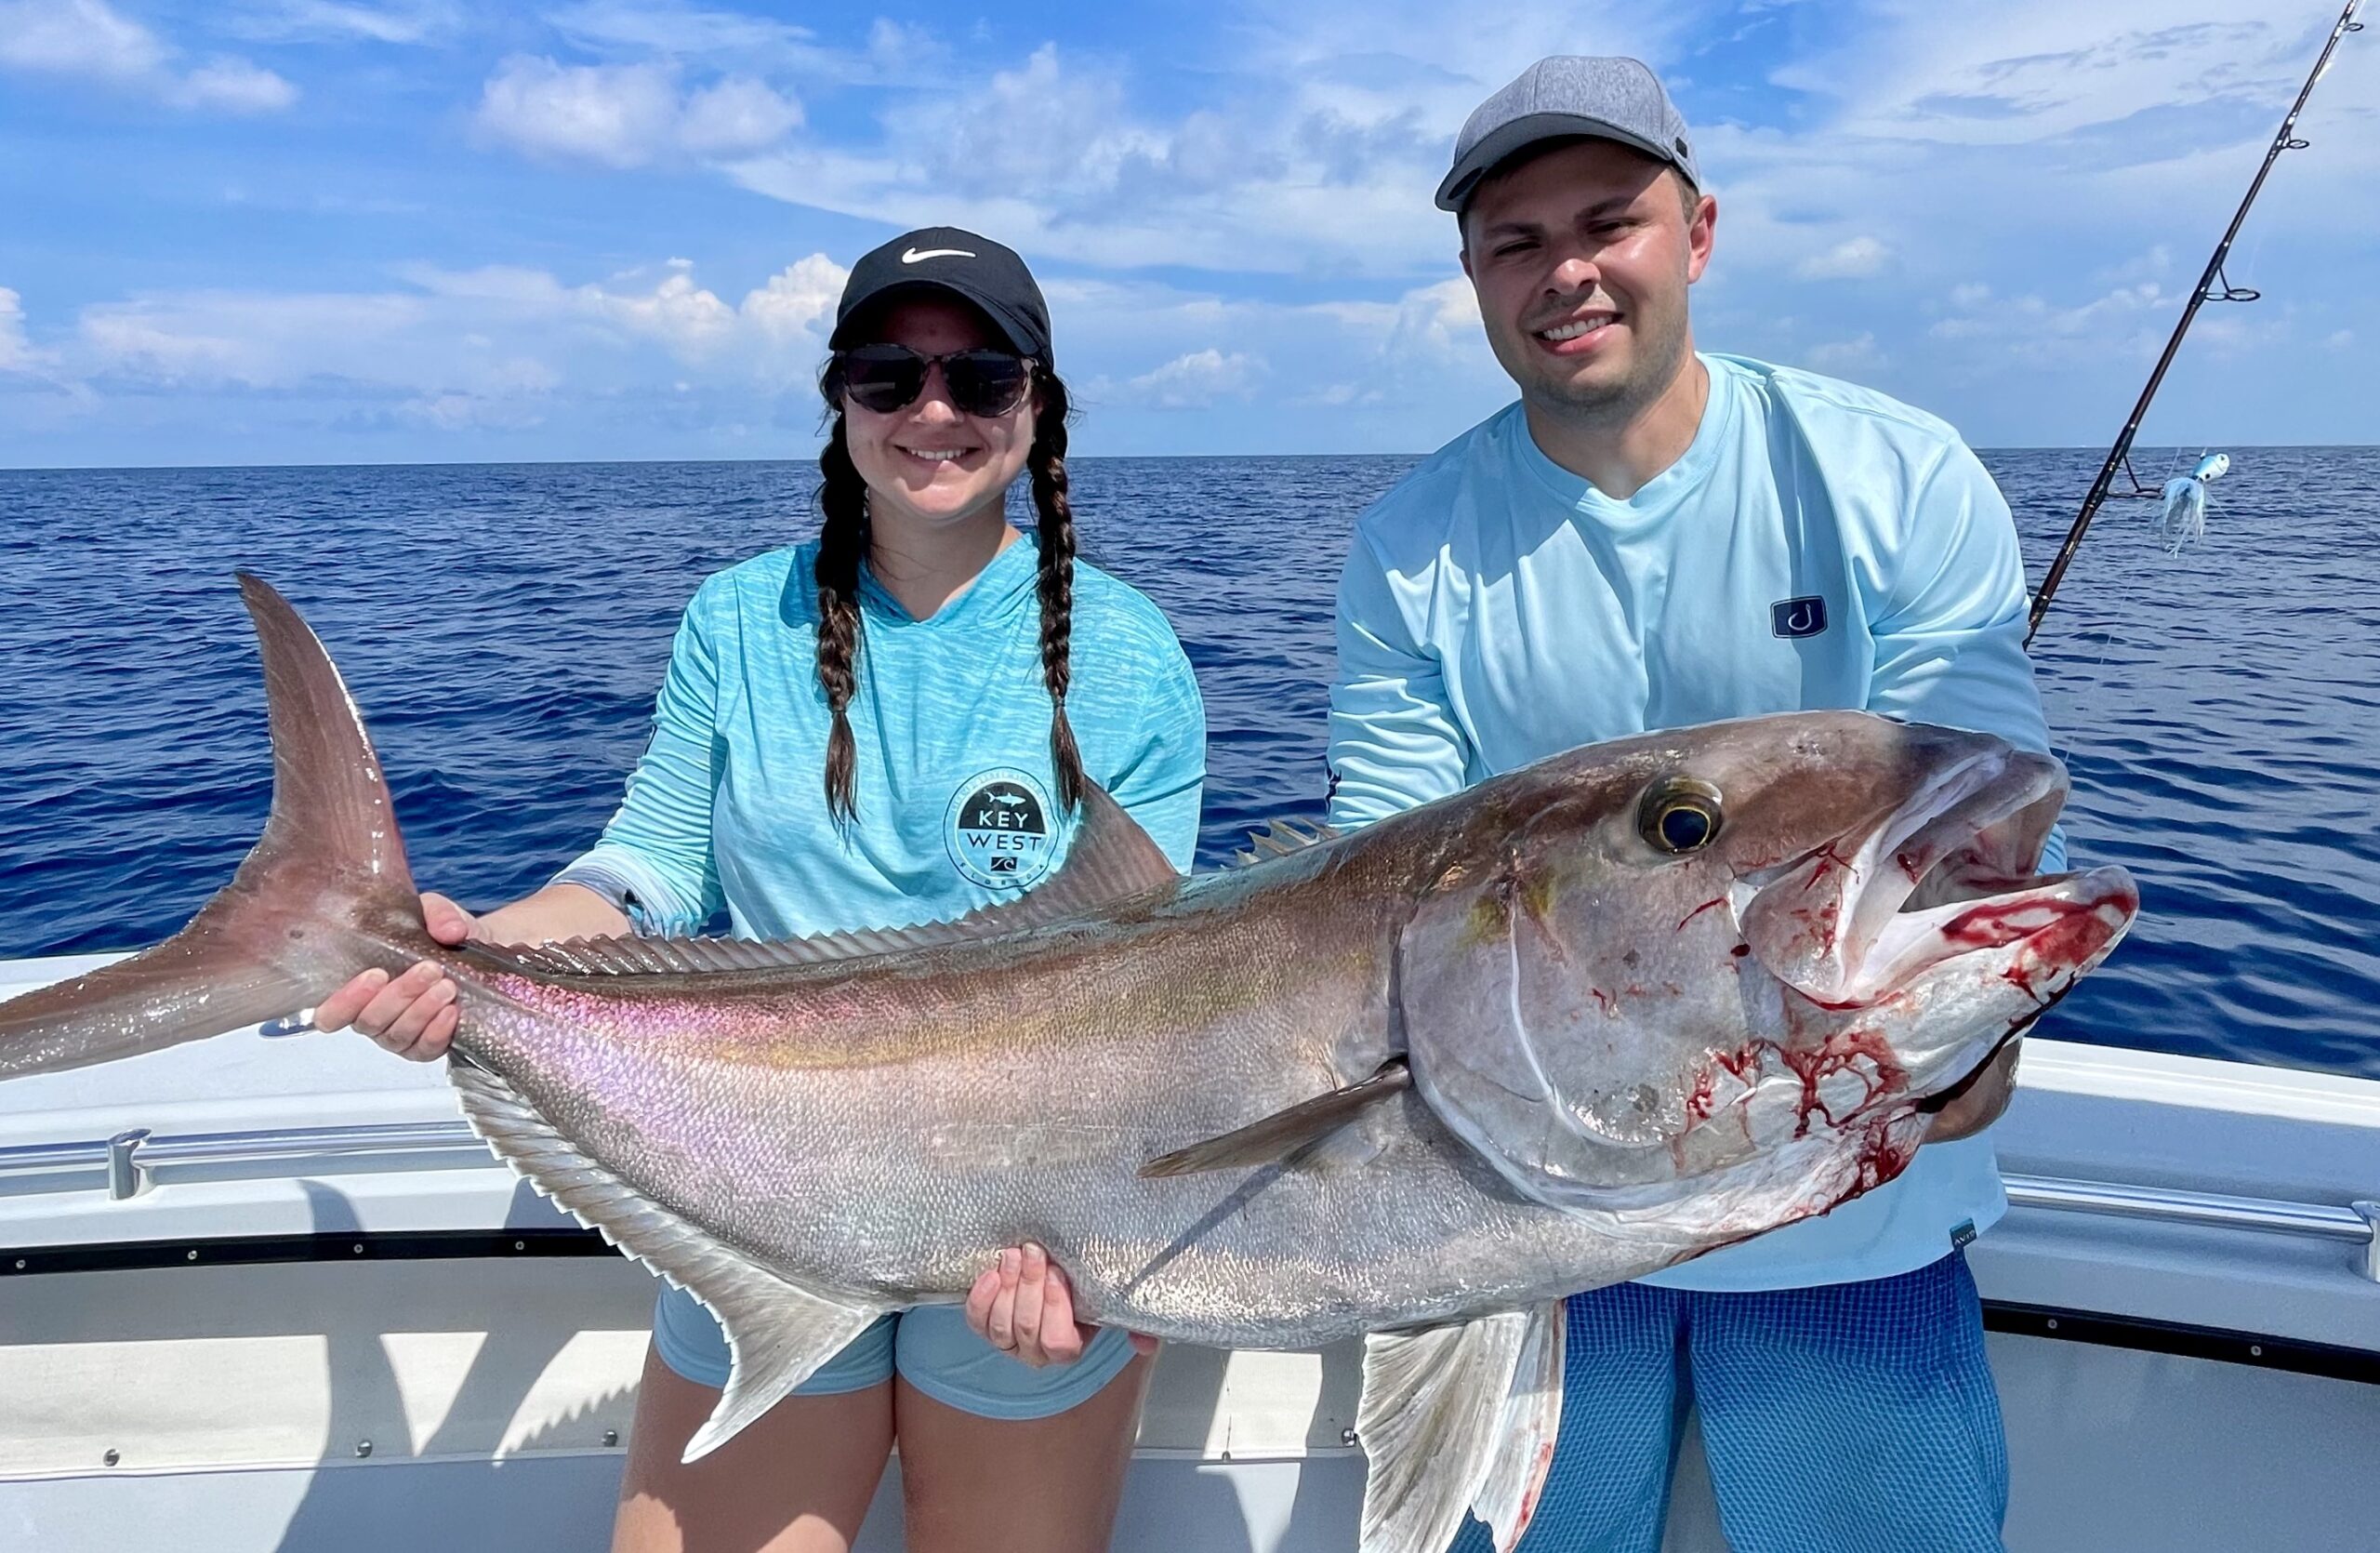 A couple on a fishing charter in Key Largo, Florida, proudly holding a massive Amberjack fish they caught. The background shows the beautiful waters of Key Largo.